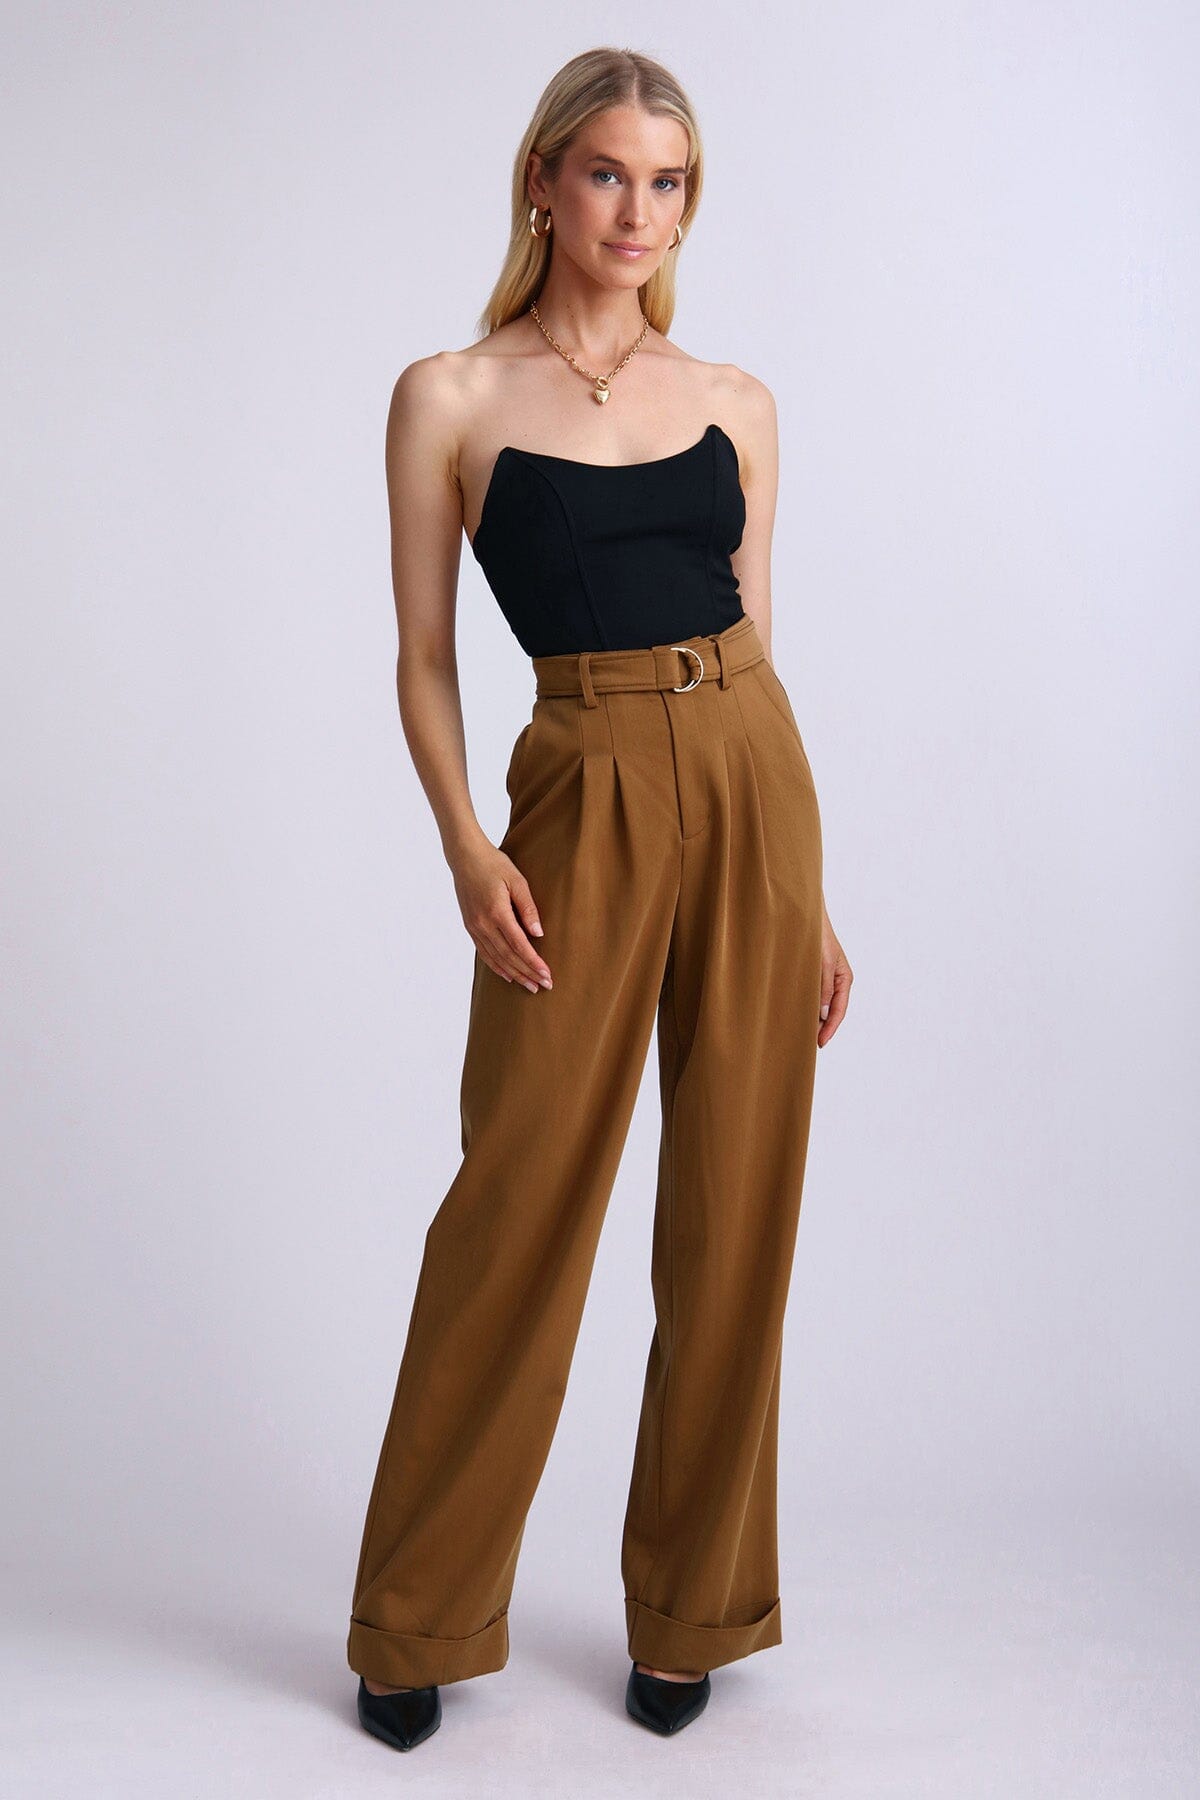 Amber brown lyocell blend belted wide leg trouser pant - figure flattering fall fashion trousers bottoms pants for women by avec les filles